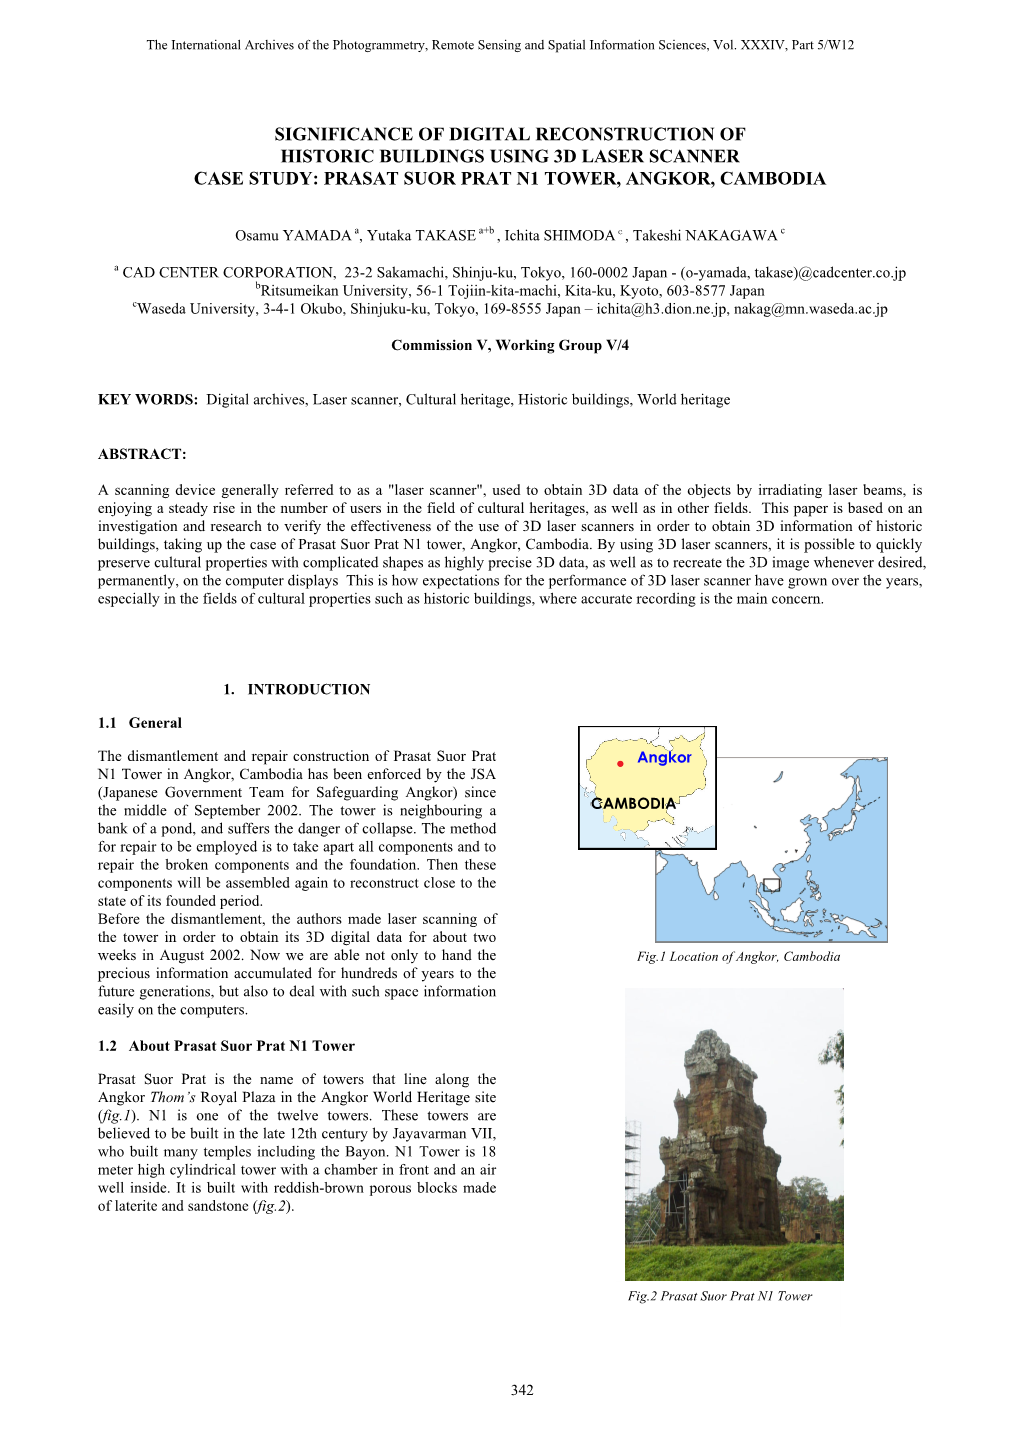 Significance of Digital Reconstruction of Historic Buildings Using 3D Laser Scanner Case Study: Prasat Suor Prat N1 Tower, Angkor, Cambodia